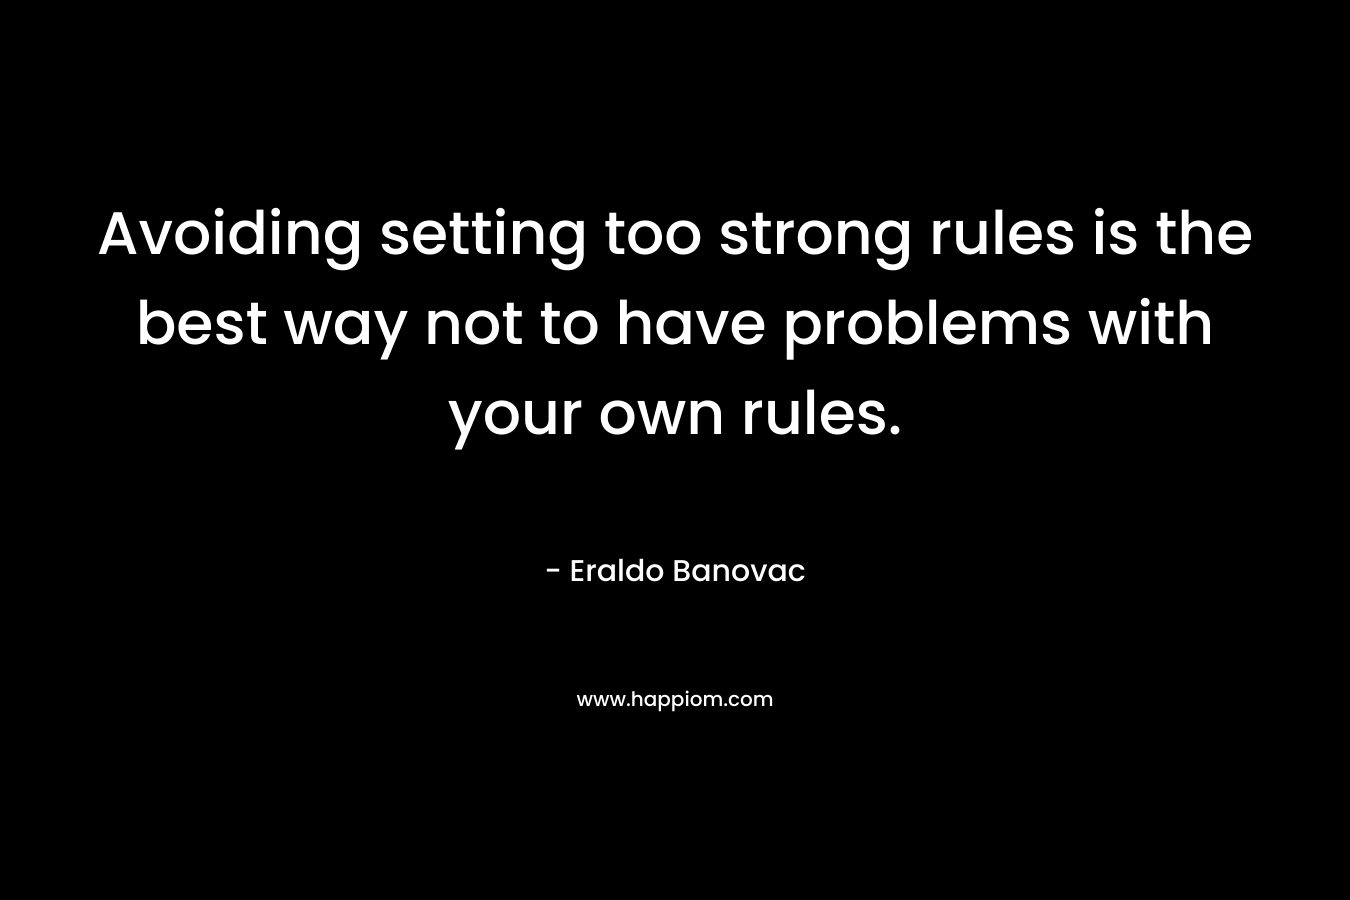 Avoiding setting too strong rules is the best way not to have problems with your own rules. – Eraldo Banovac